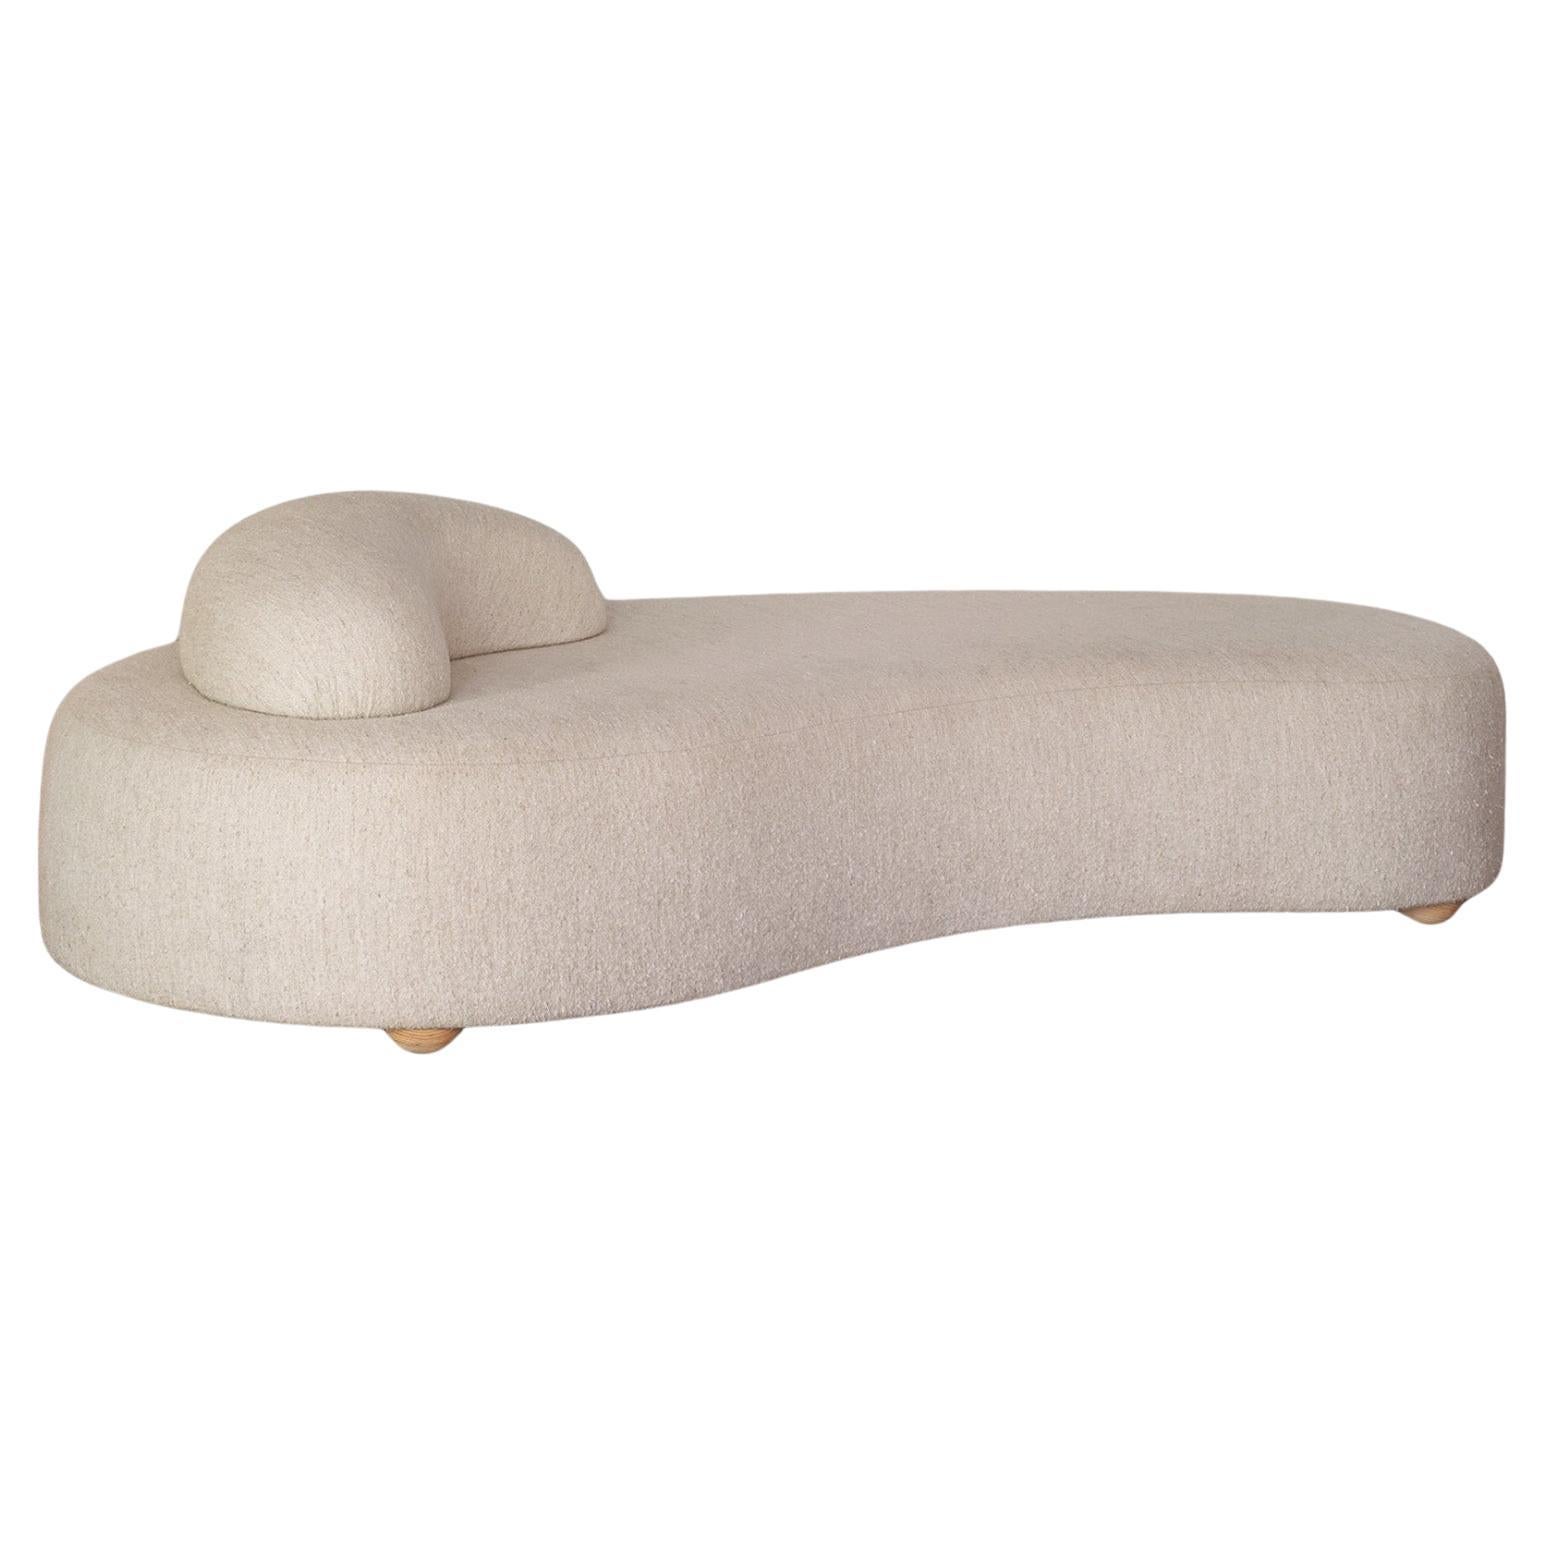 Fawcett Embrace Your Curves Daybed with Moveable Weighted Arm Rest For Sale